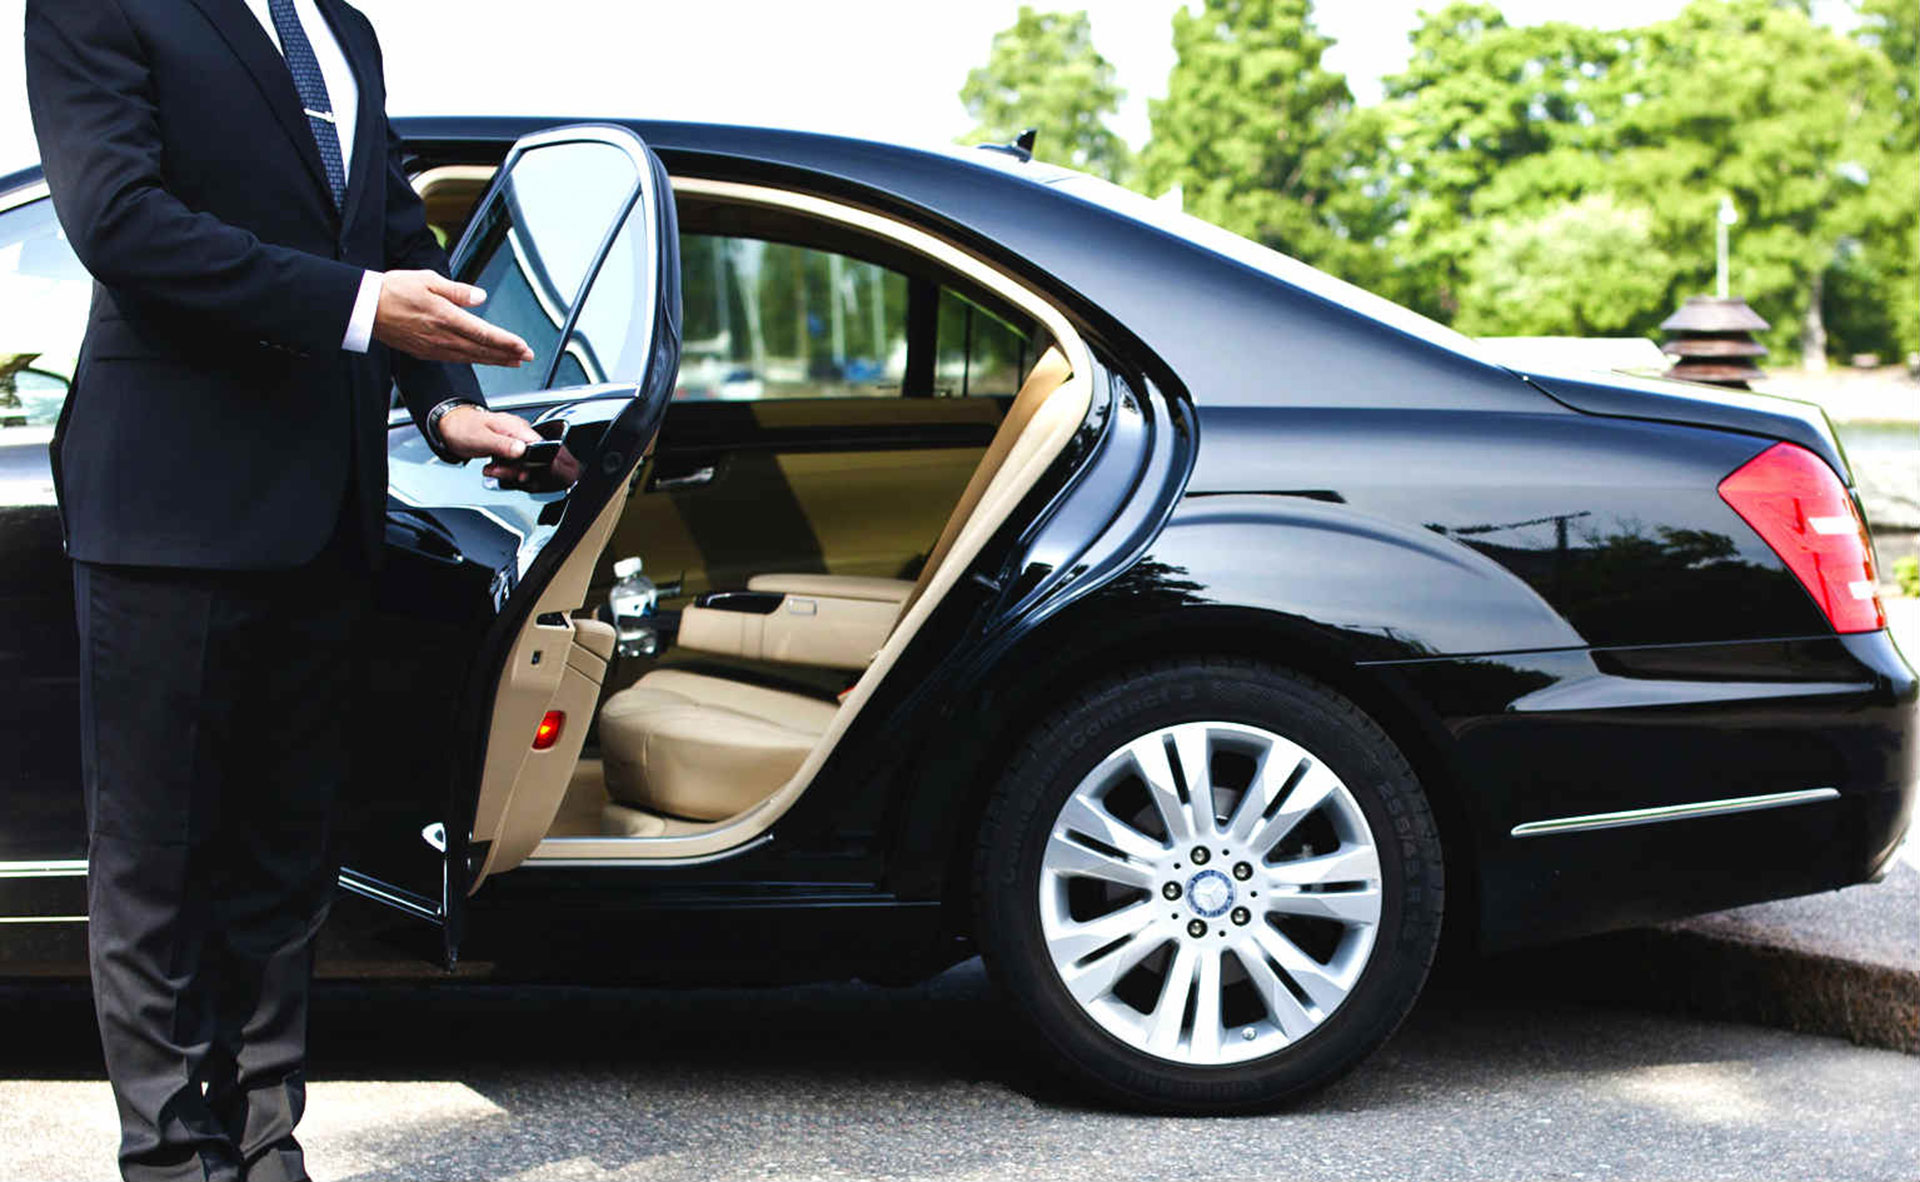 Hire-a-Limousine-With-a-Professional-Driver